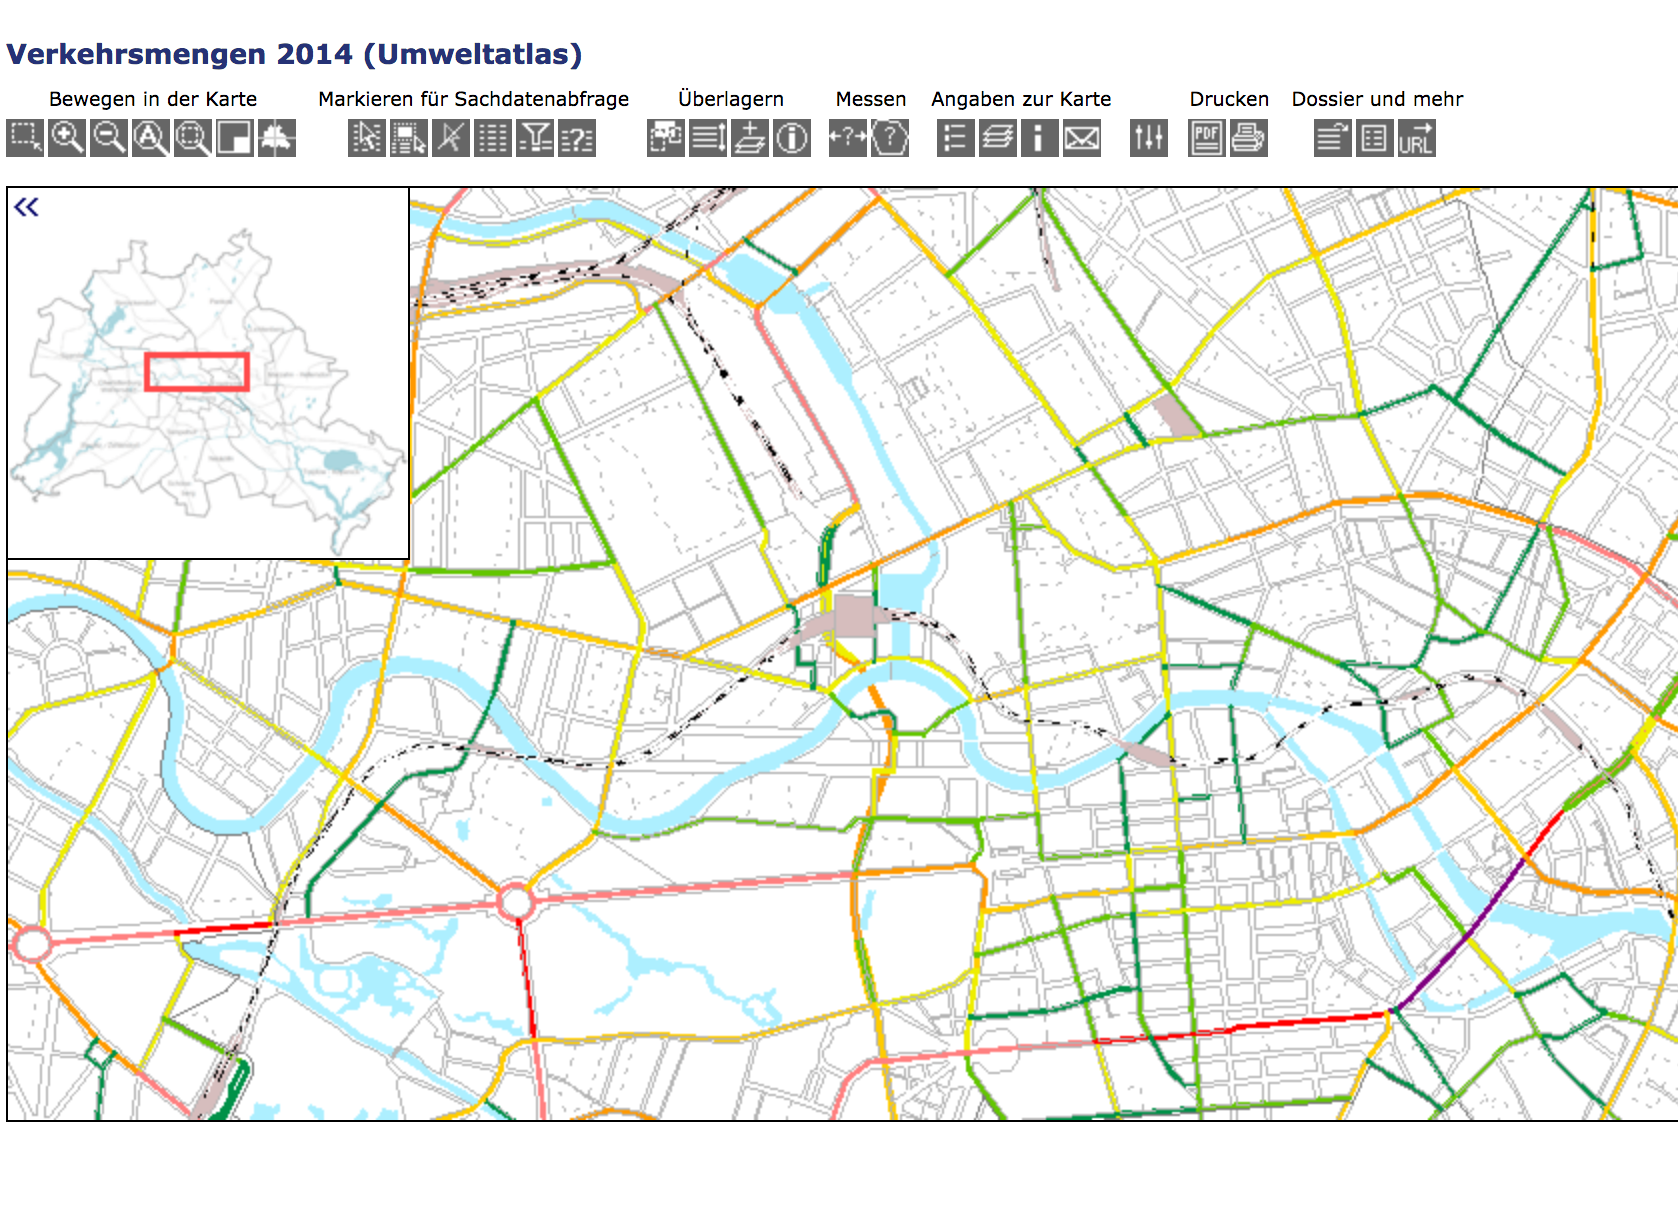 A map showing the volume of road usage in Berlin